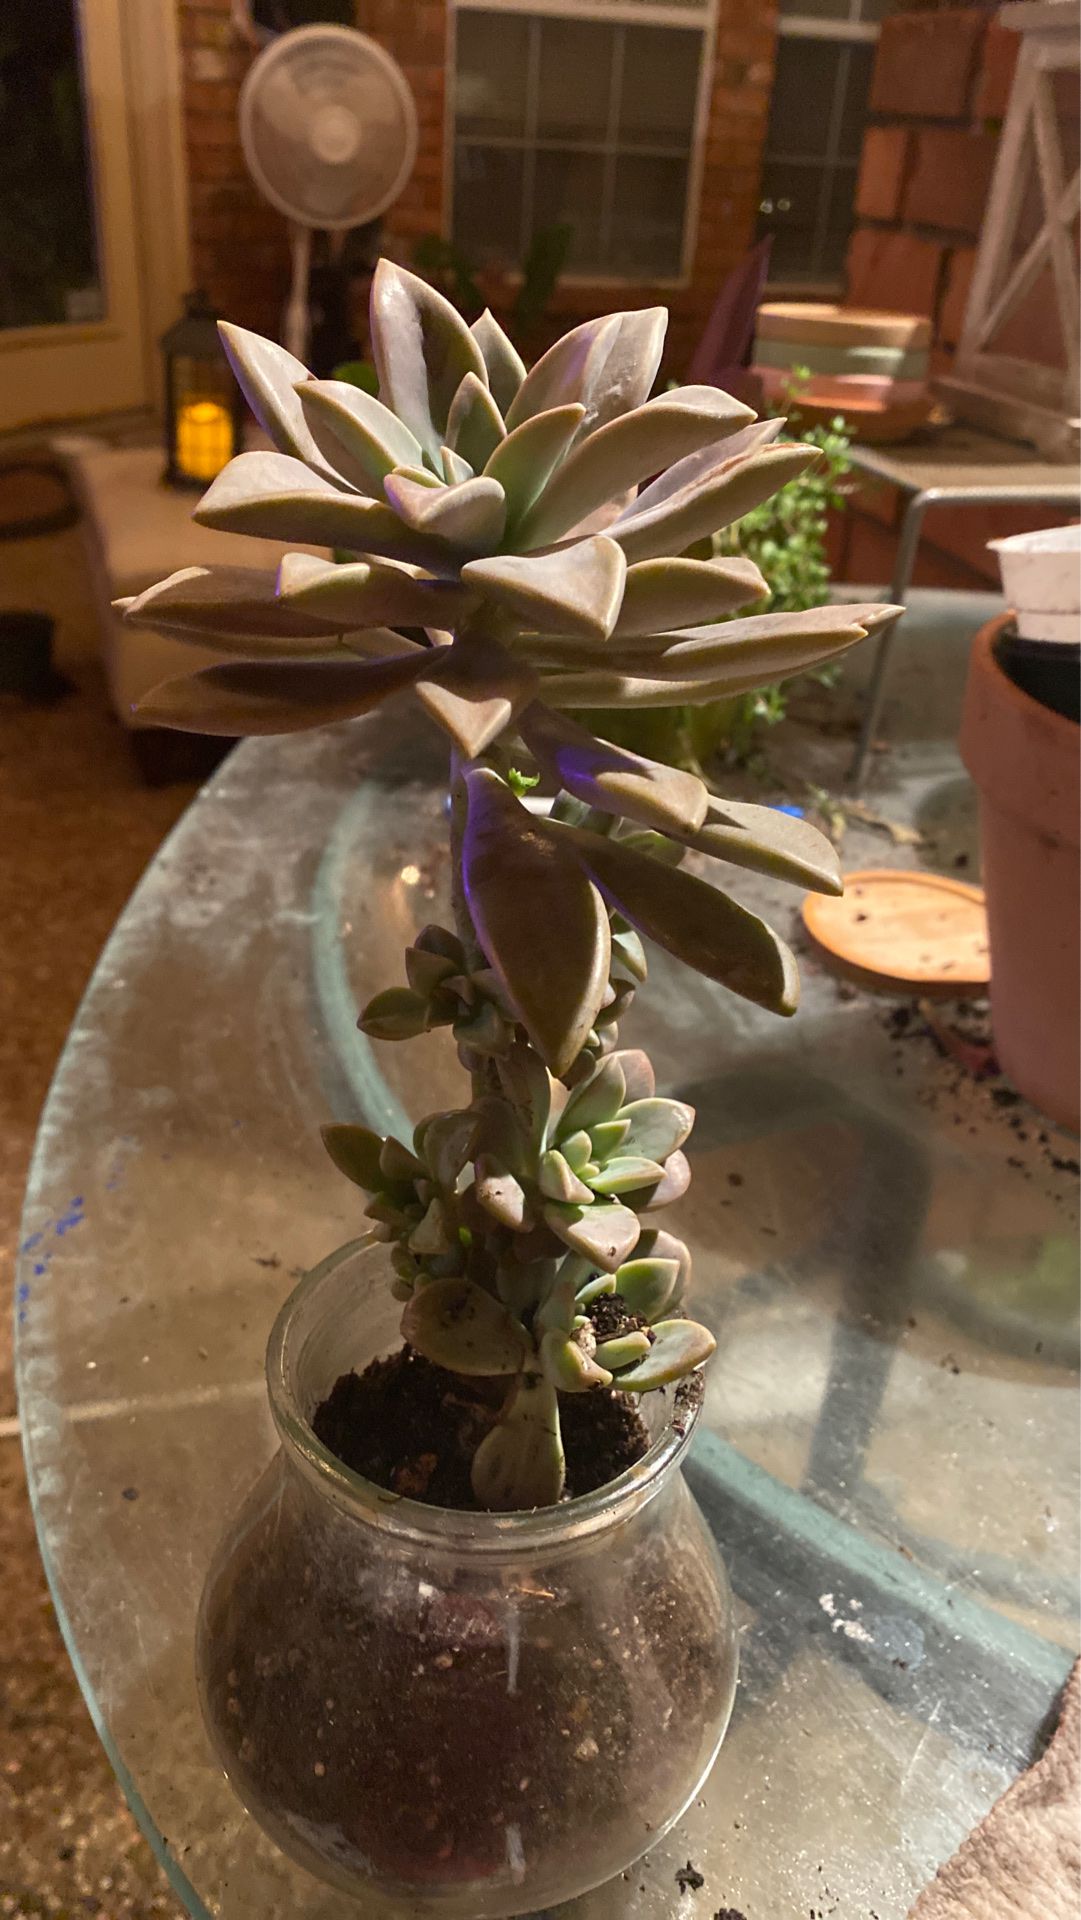 Huge Escheveria succulent with tons of tiny babies growing on stem